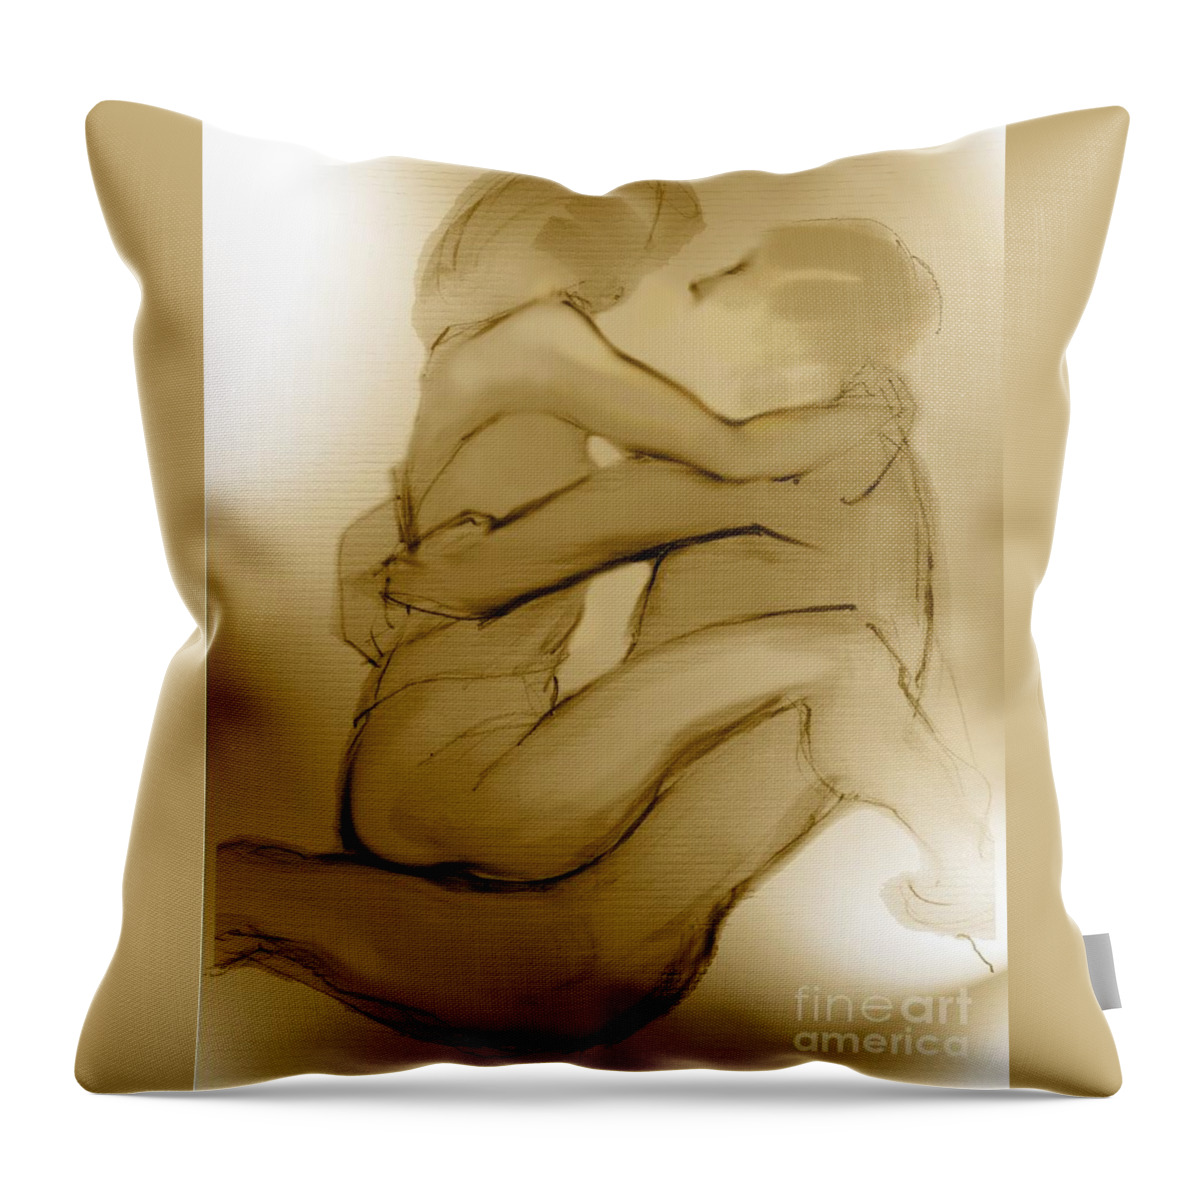 Weltman Throw Pillow featuring the mixed media In Your Arms In Your Heart by Carolyn Weltman